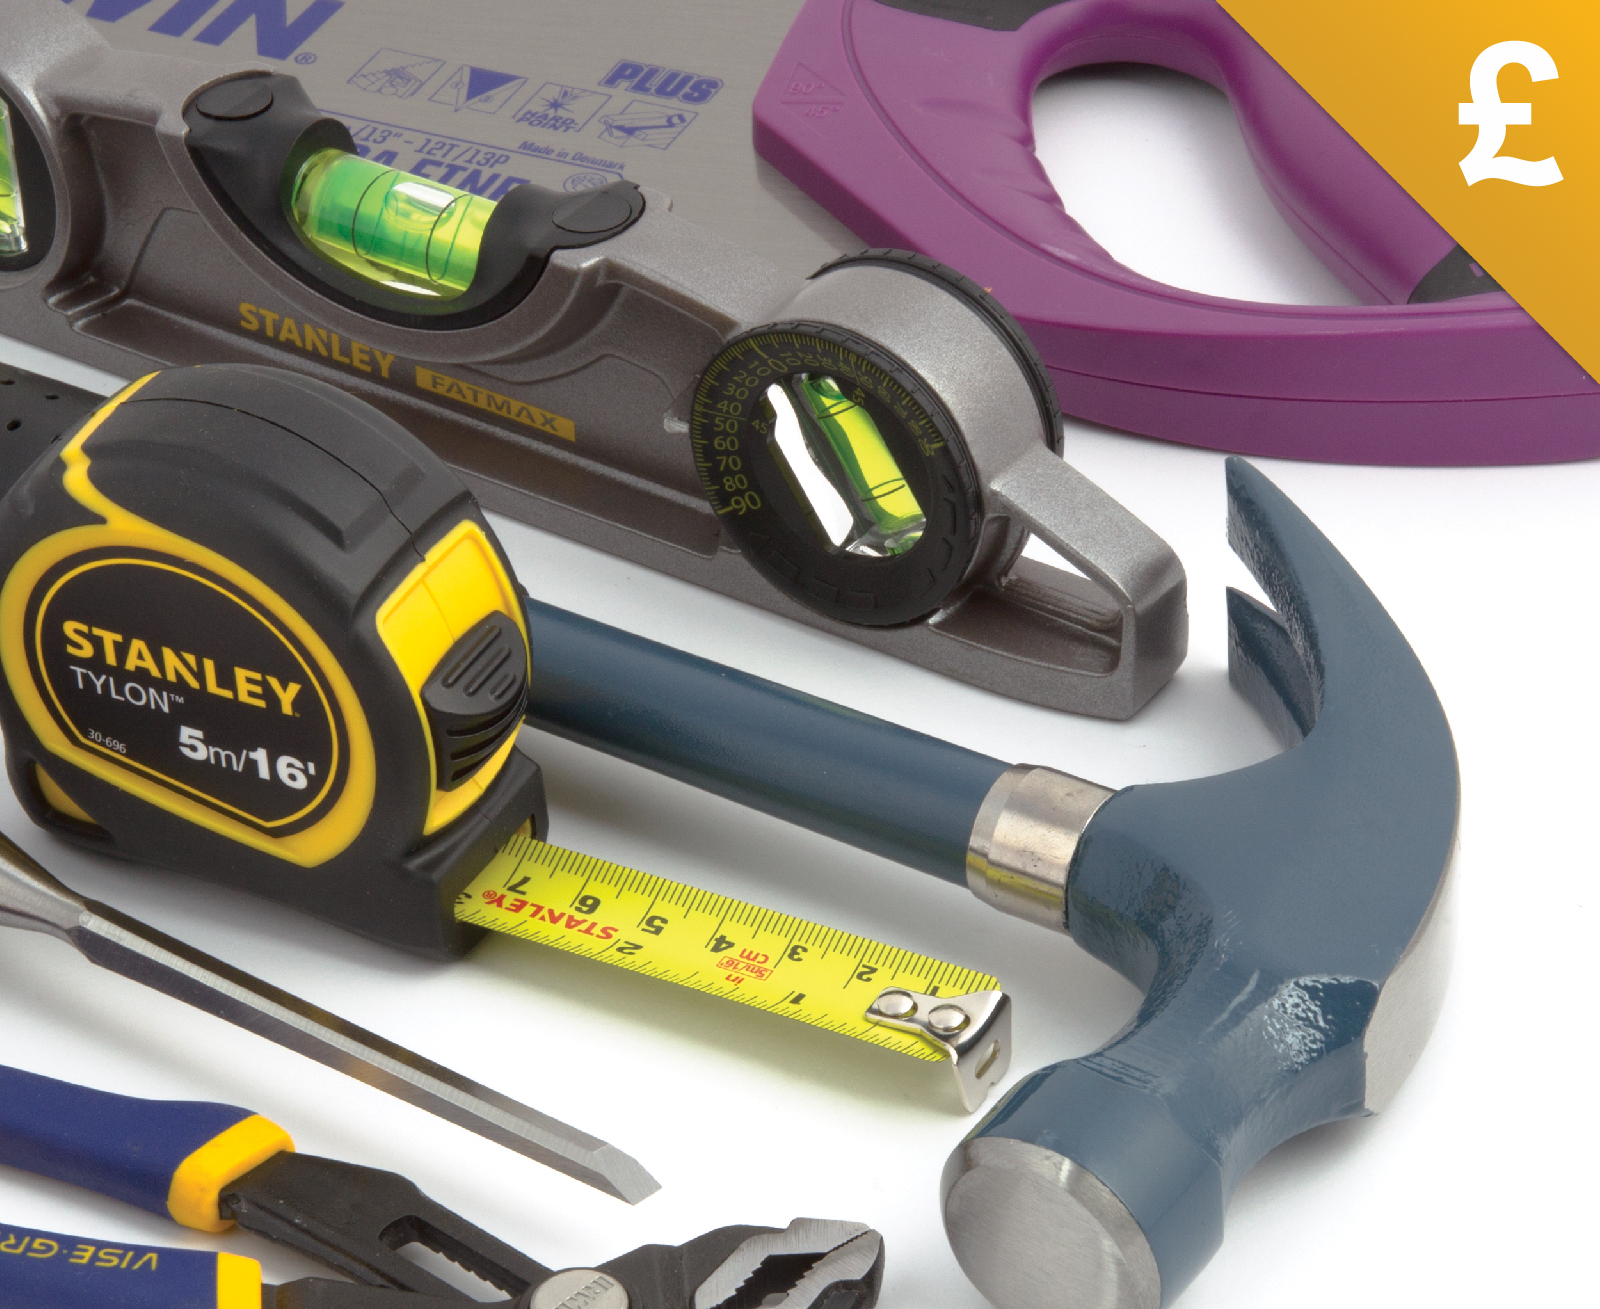 Tools and Consumables Clearance